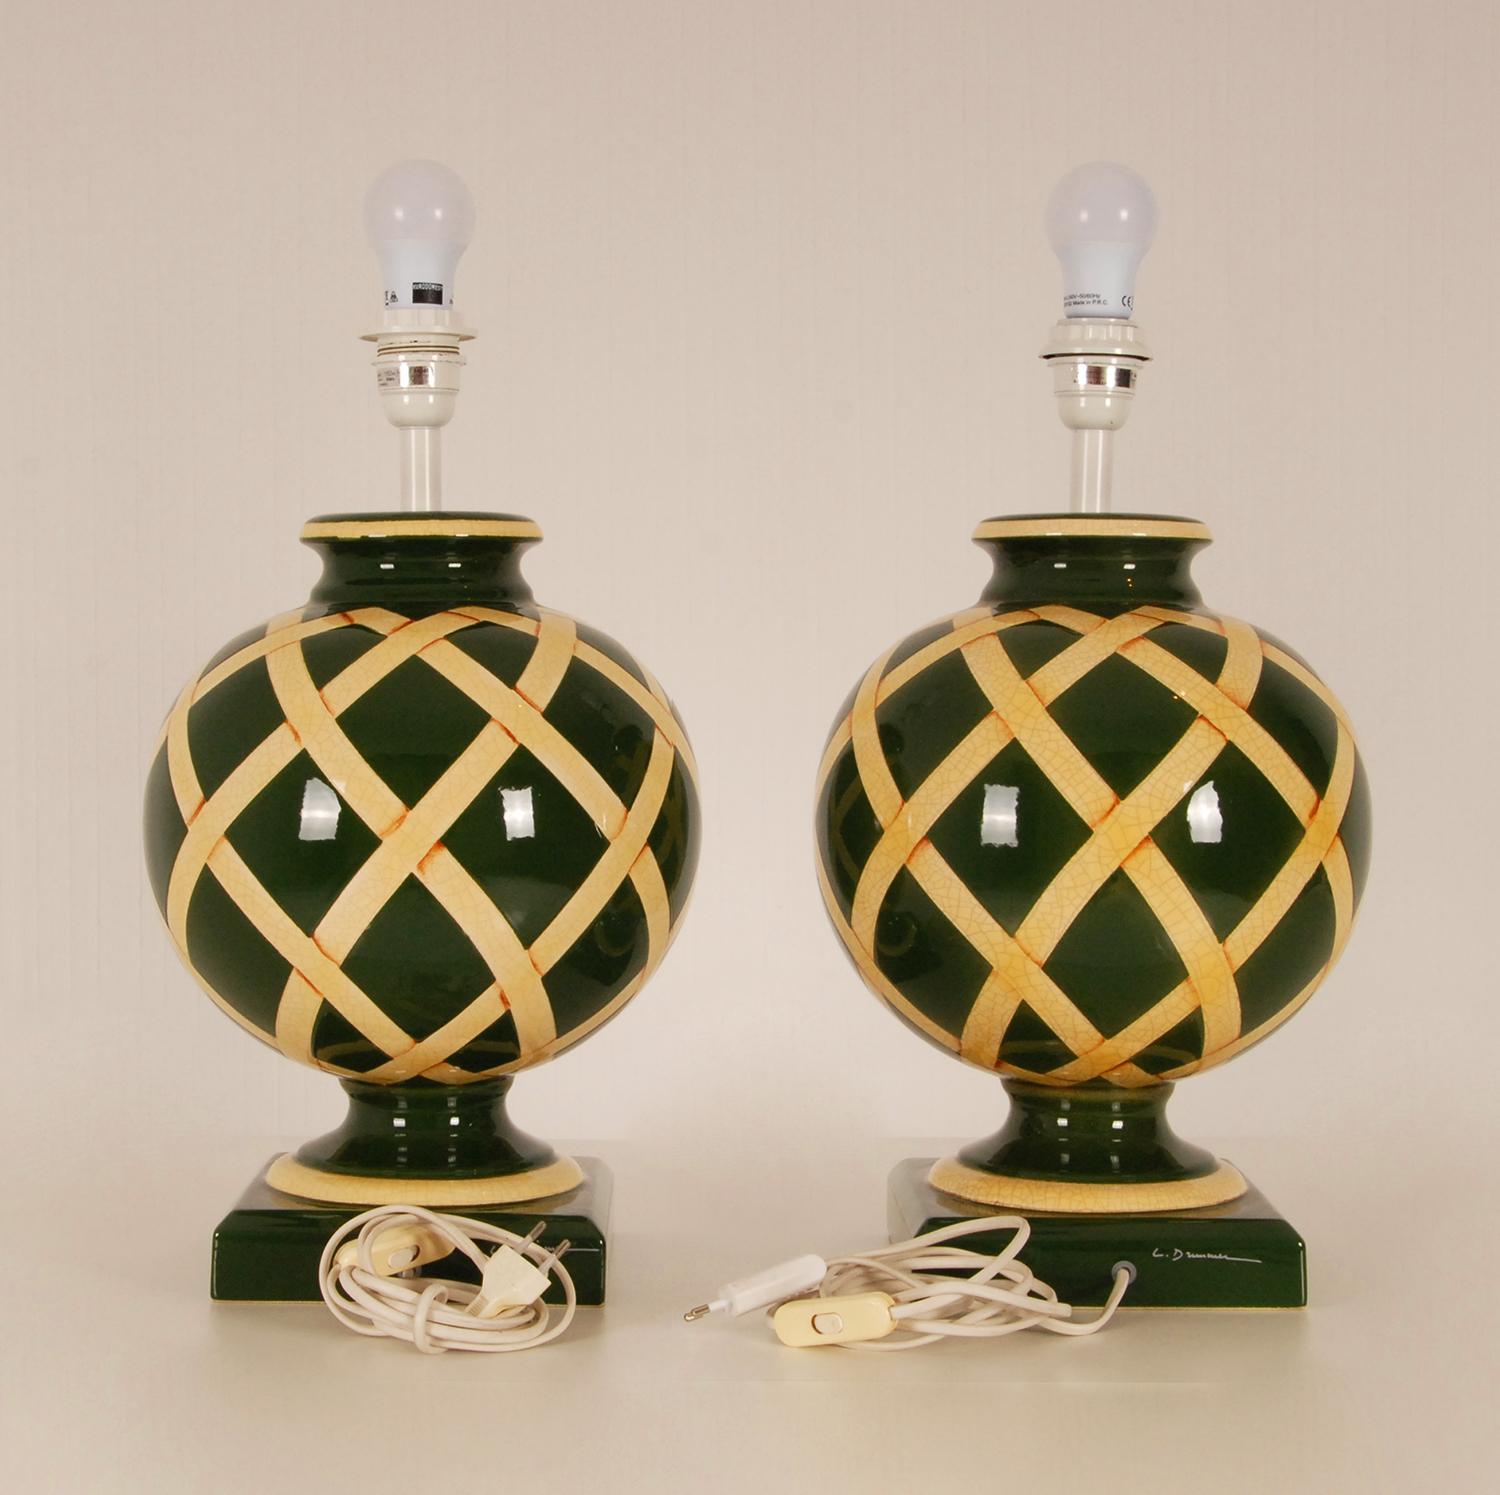 A pair of large French Classic Country Style ceramic table lamps - tall classic vase lamps

Material: Porcelain - Ceramic, Faience
Design : French (signed), Louis Drimmer
Producer: In the style of Longwy, Robert Kostka
Style: French Country style,